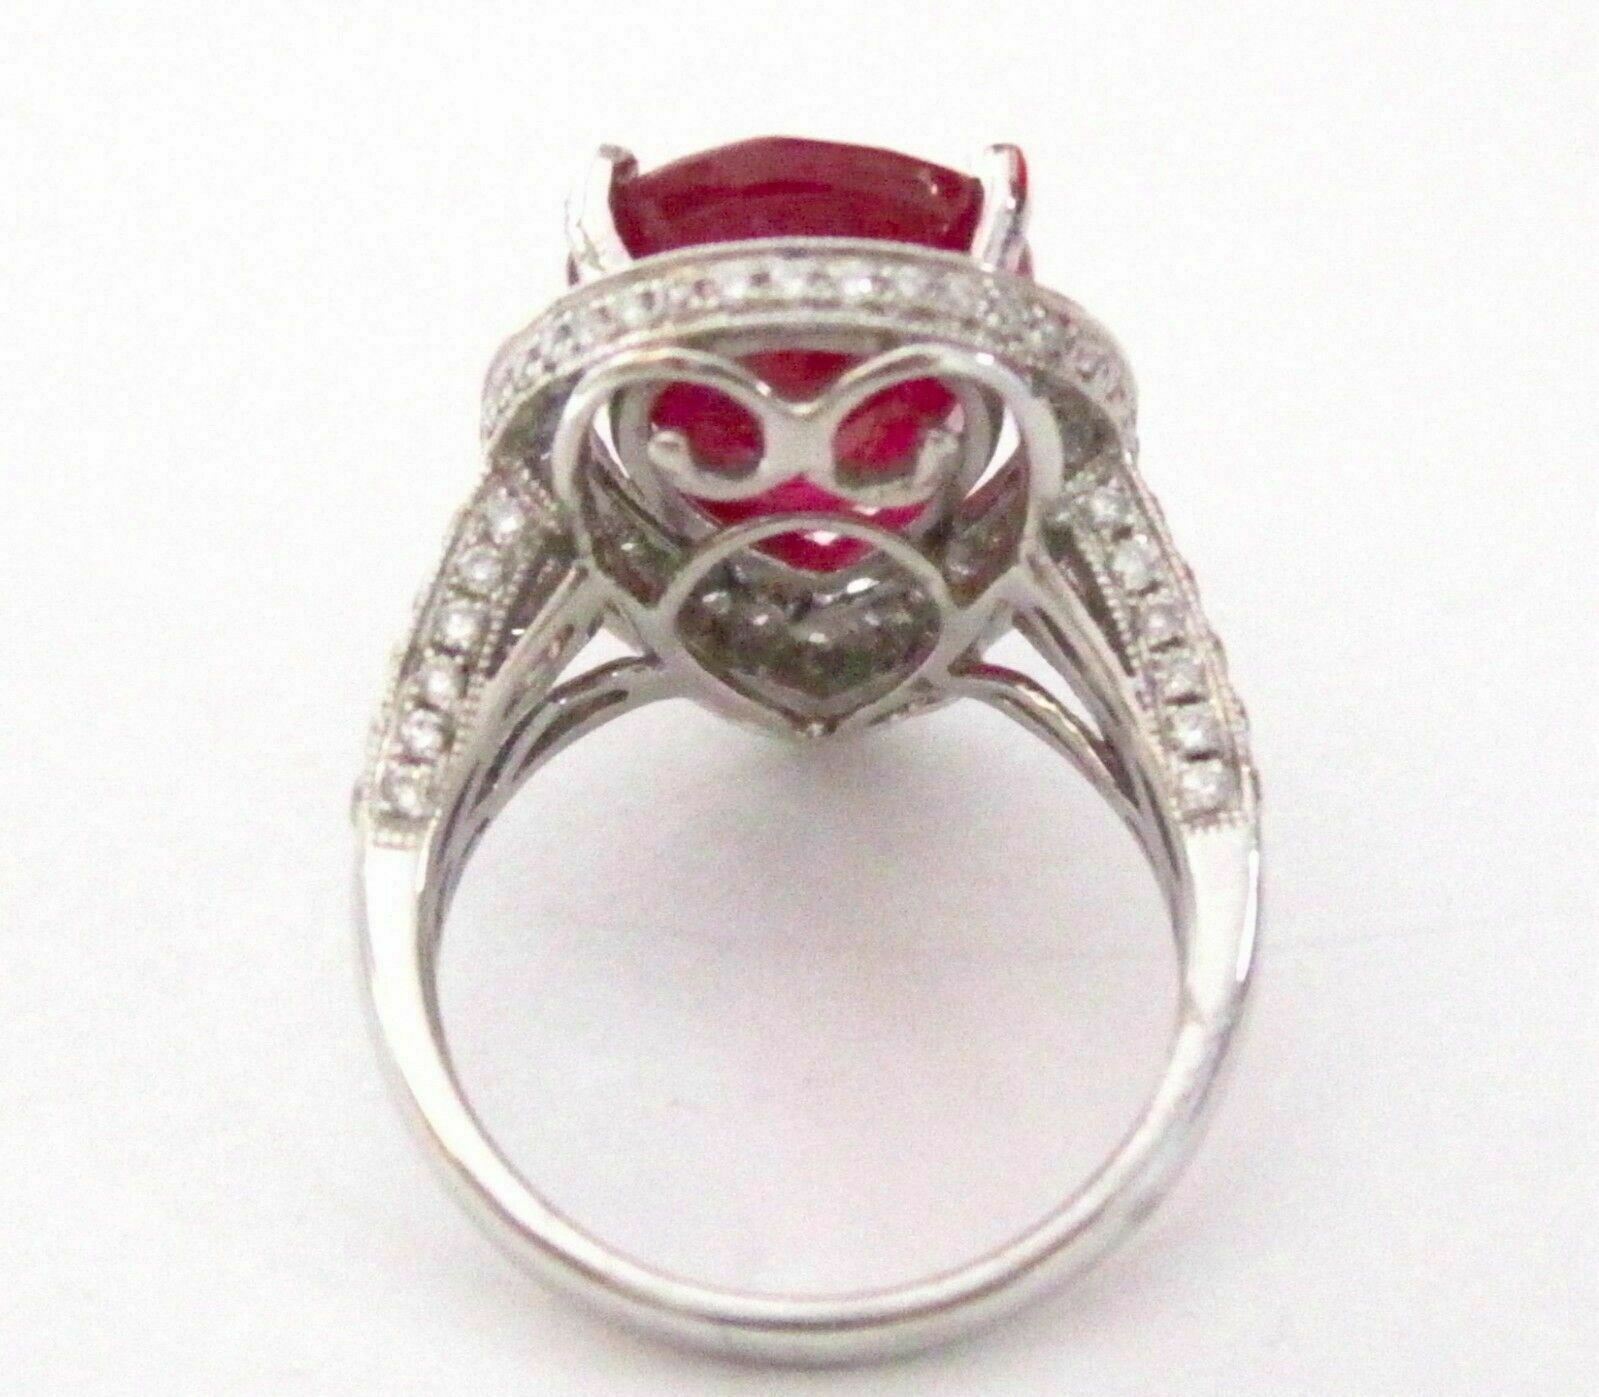 10.51 TCW Pear Cut Ruby w/ Diamond Accents Cocktail Ring Size 6 18k White Gold